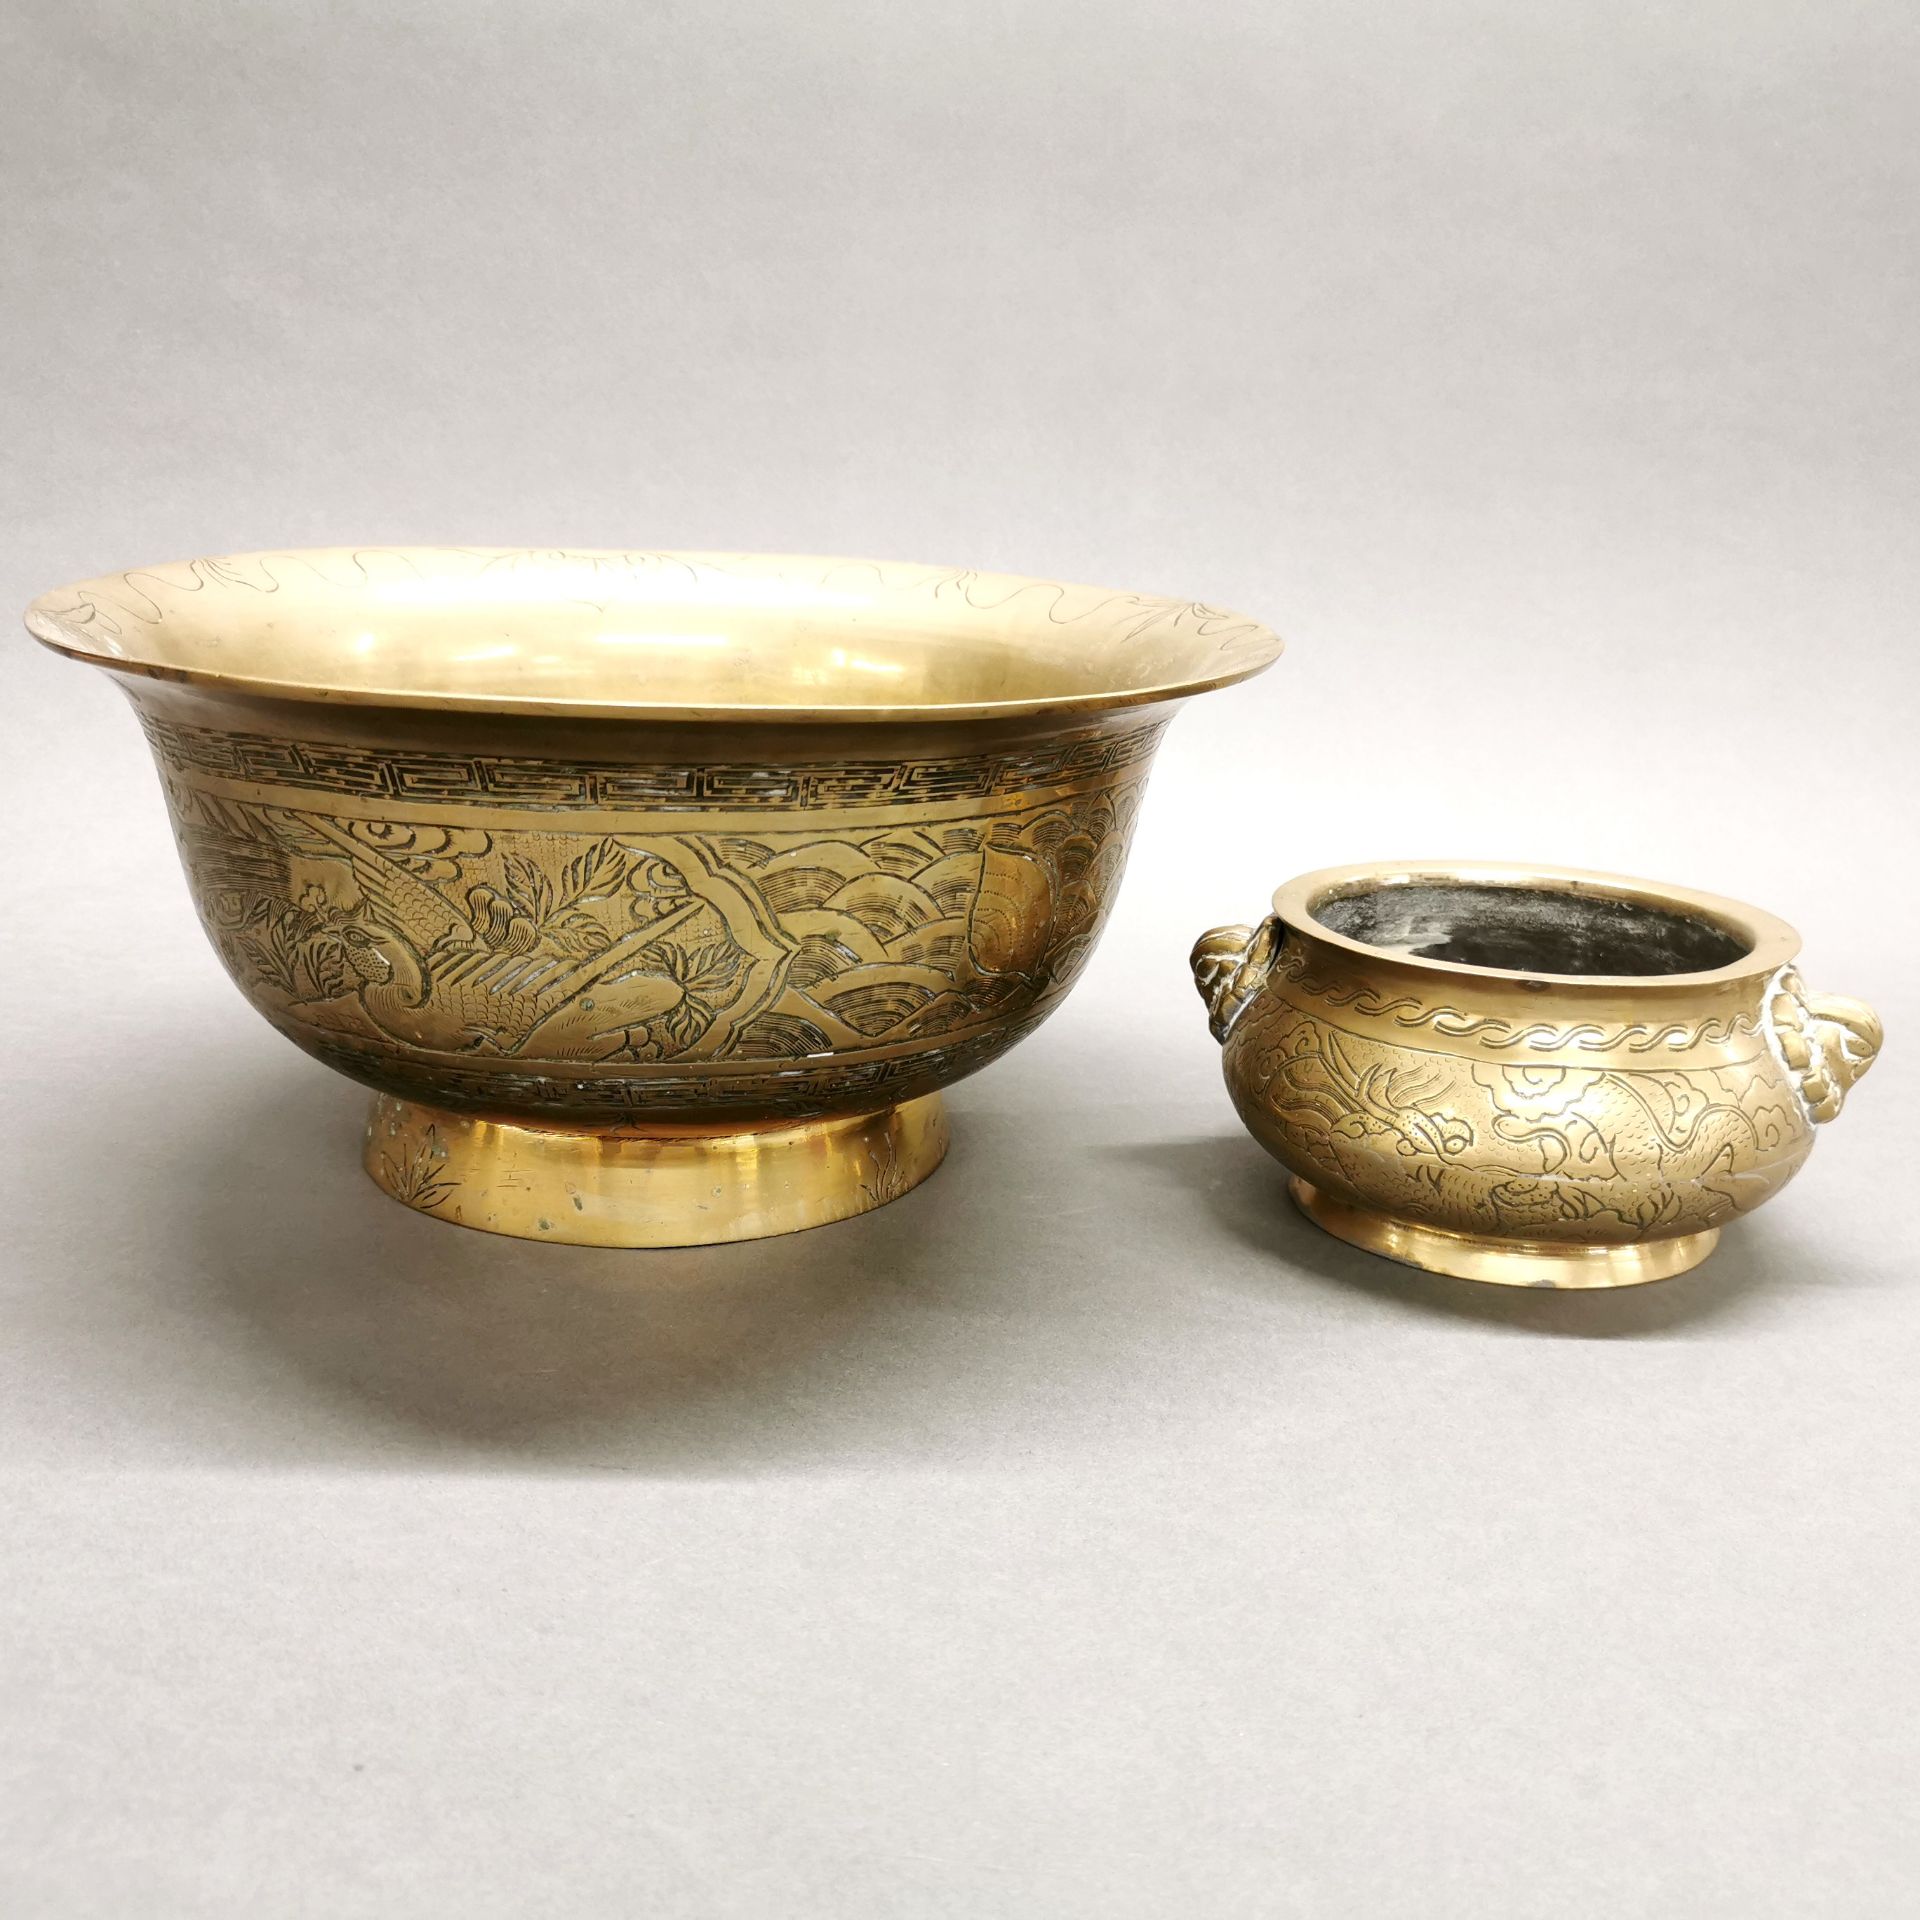 A large early 20thC Chinese engraved brass bowl, dia. 32.5cm. Together with a similar period